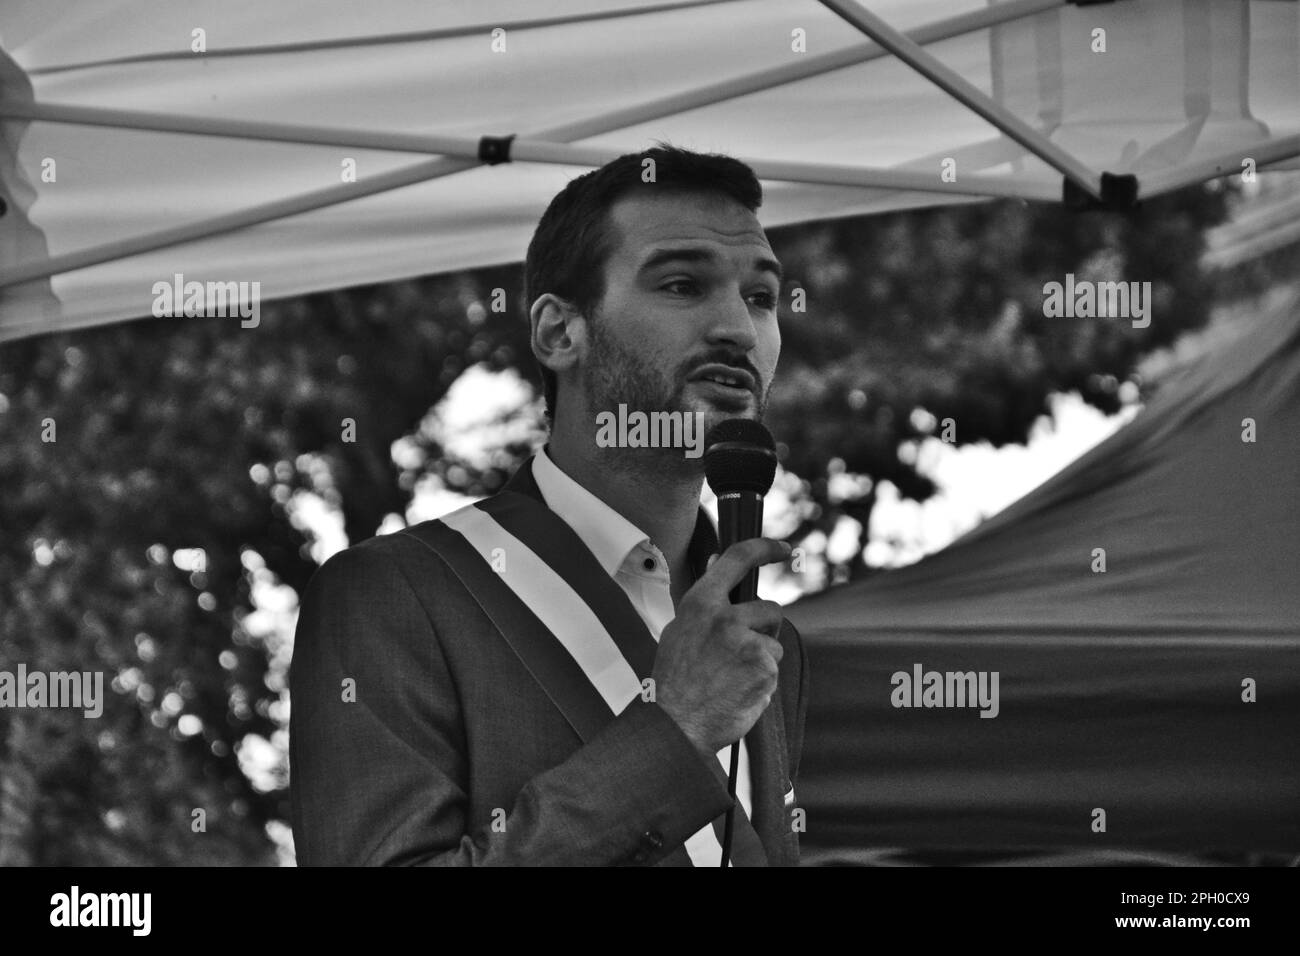 Paris, France - July 11th 2017 : Portrait of Ugo Bernalicis, a french deputy and member of 'La France Insoumise' during the meeting at Republic square Stock Photo